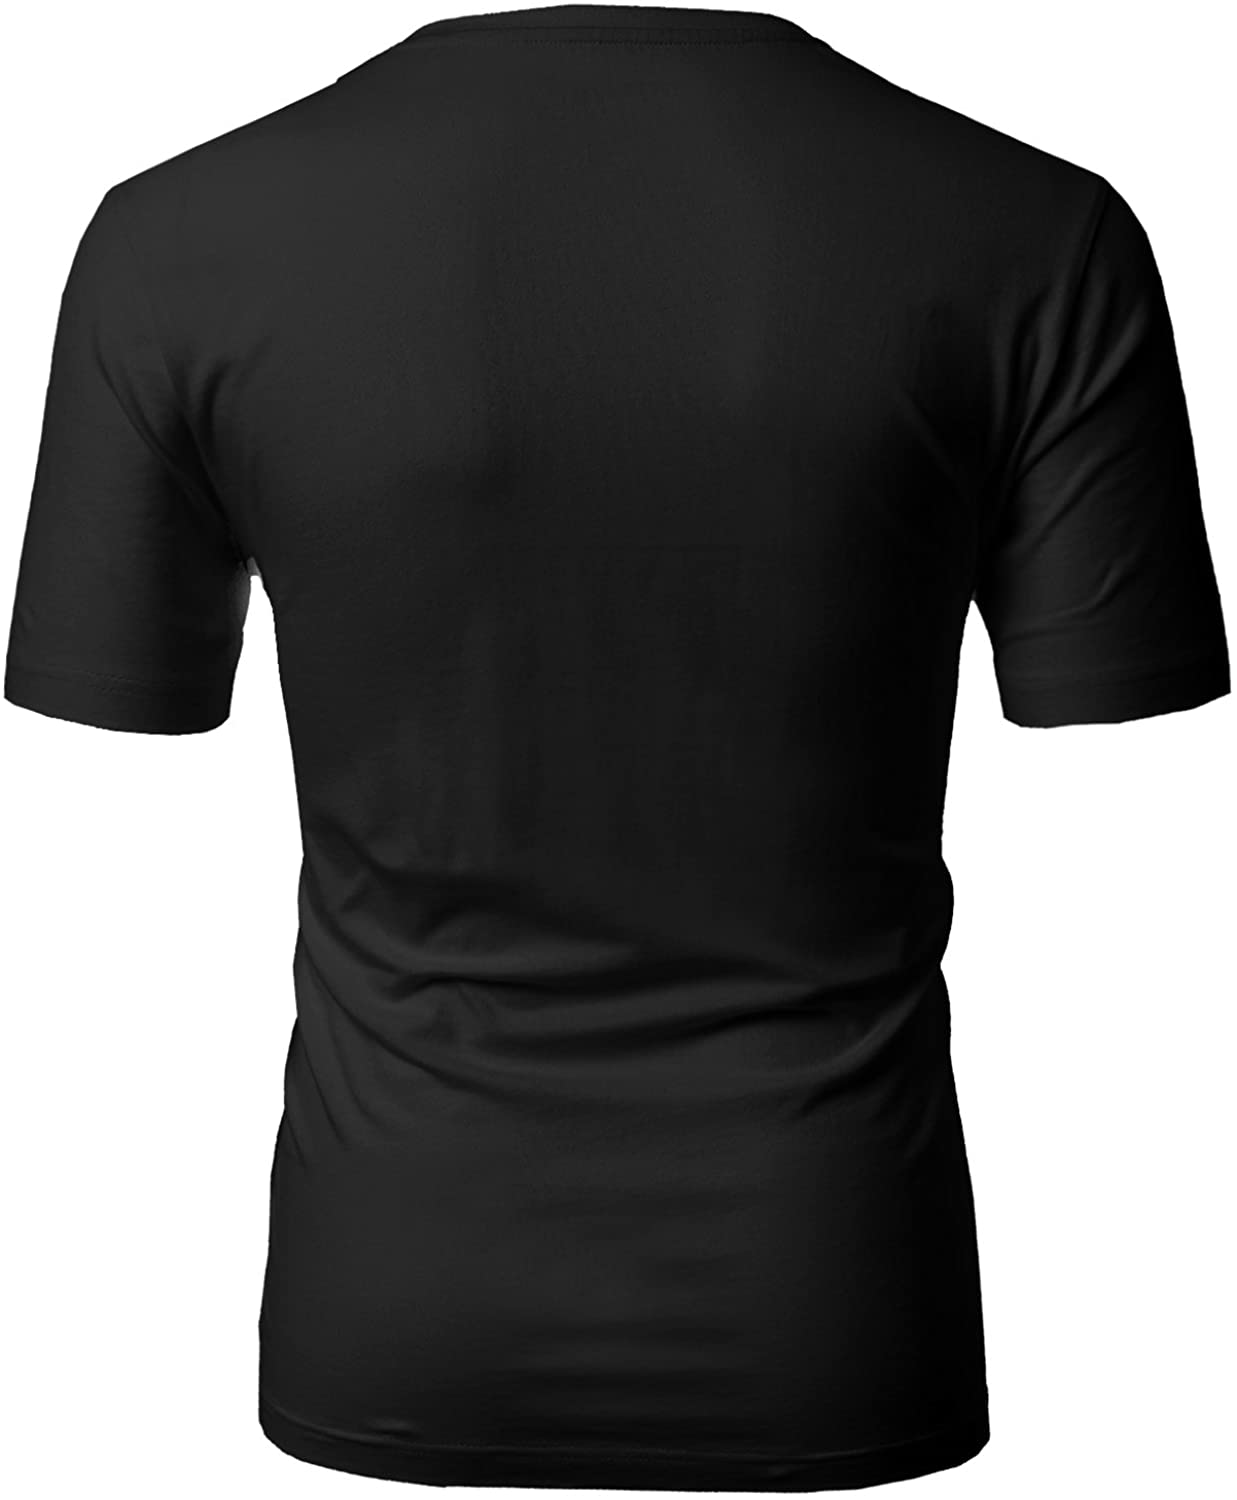 H2H Mens Casual Slim Fit Short Sleeve T-Shirts, Cmtts0197-black, Size ...